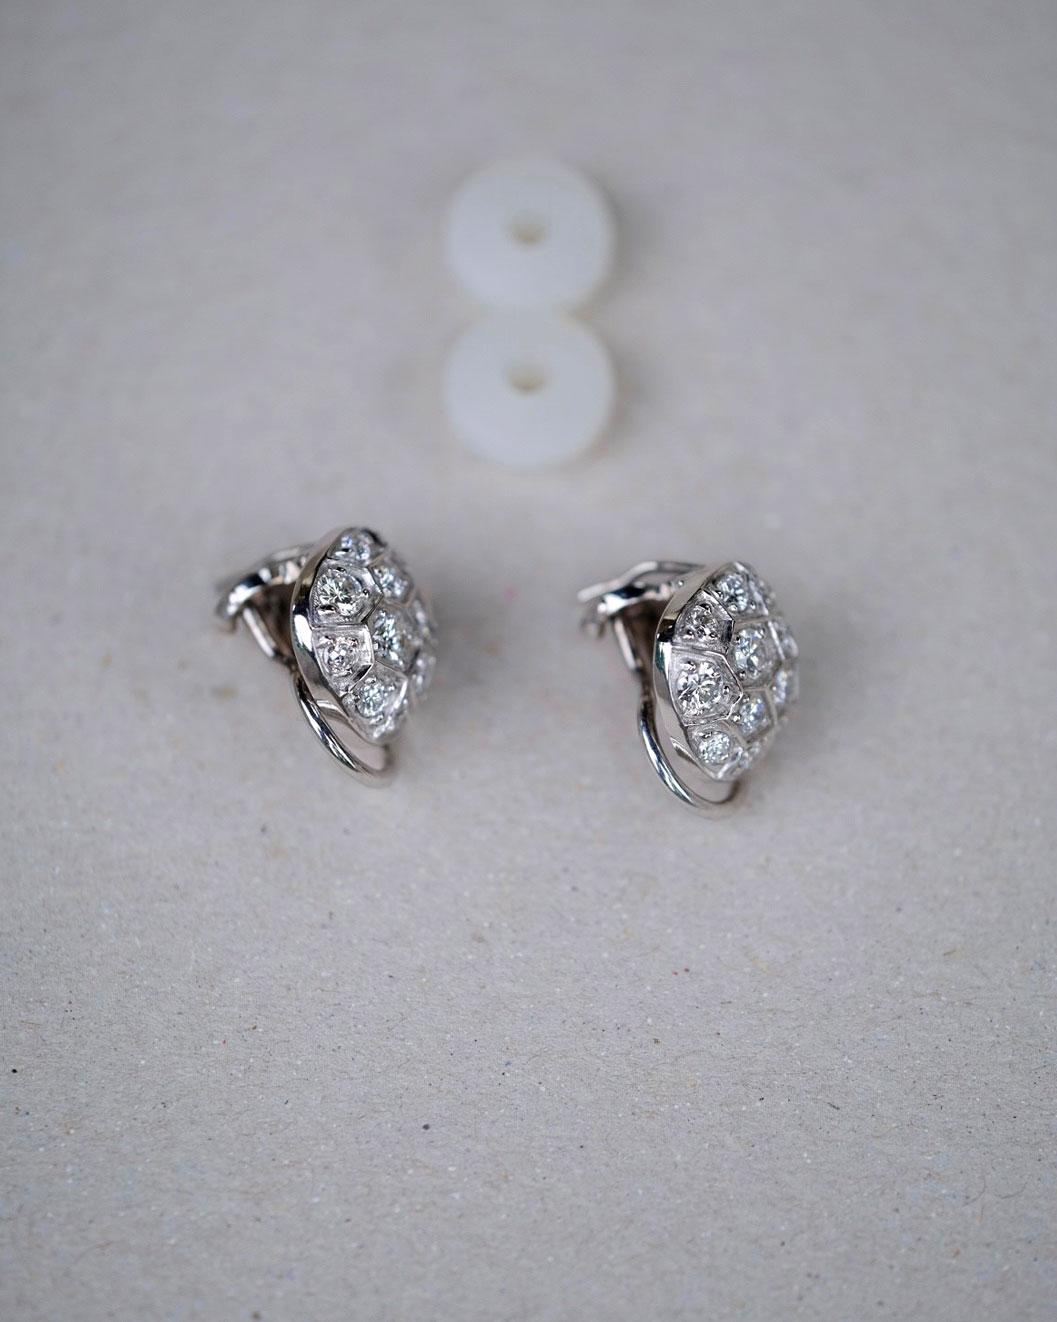 Earrings in White Gold with 26 Diamonds, 1, 56ct.. For Sale 5